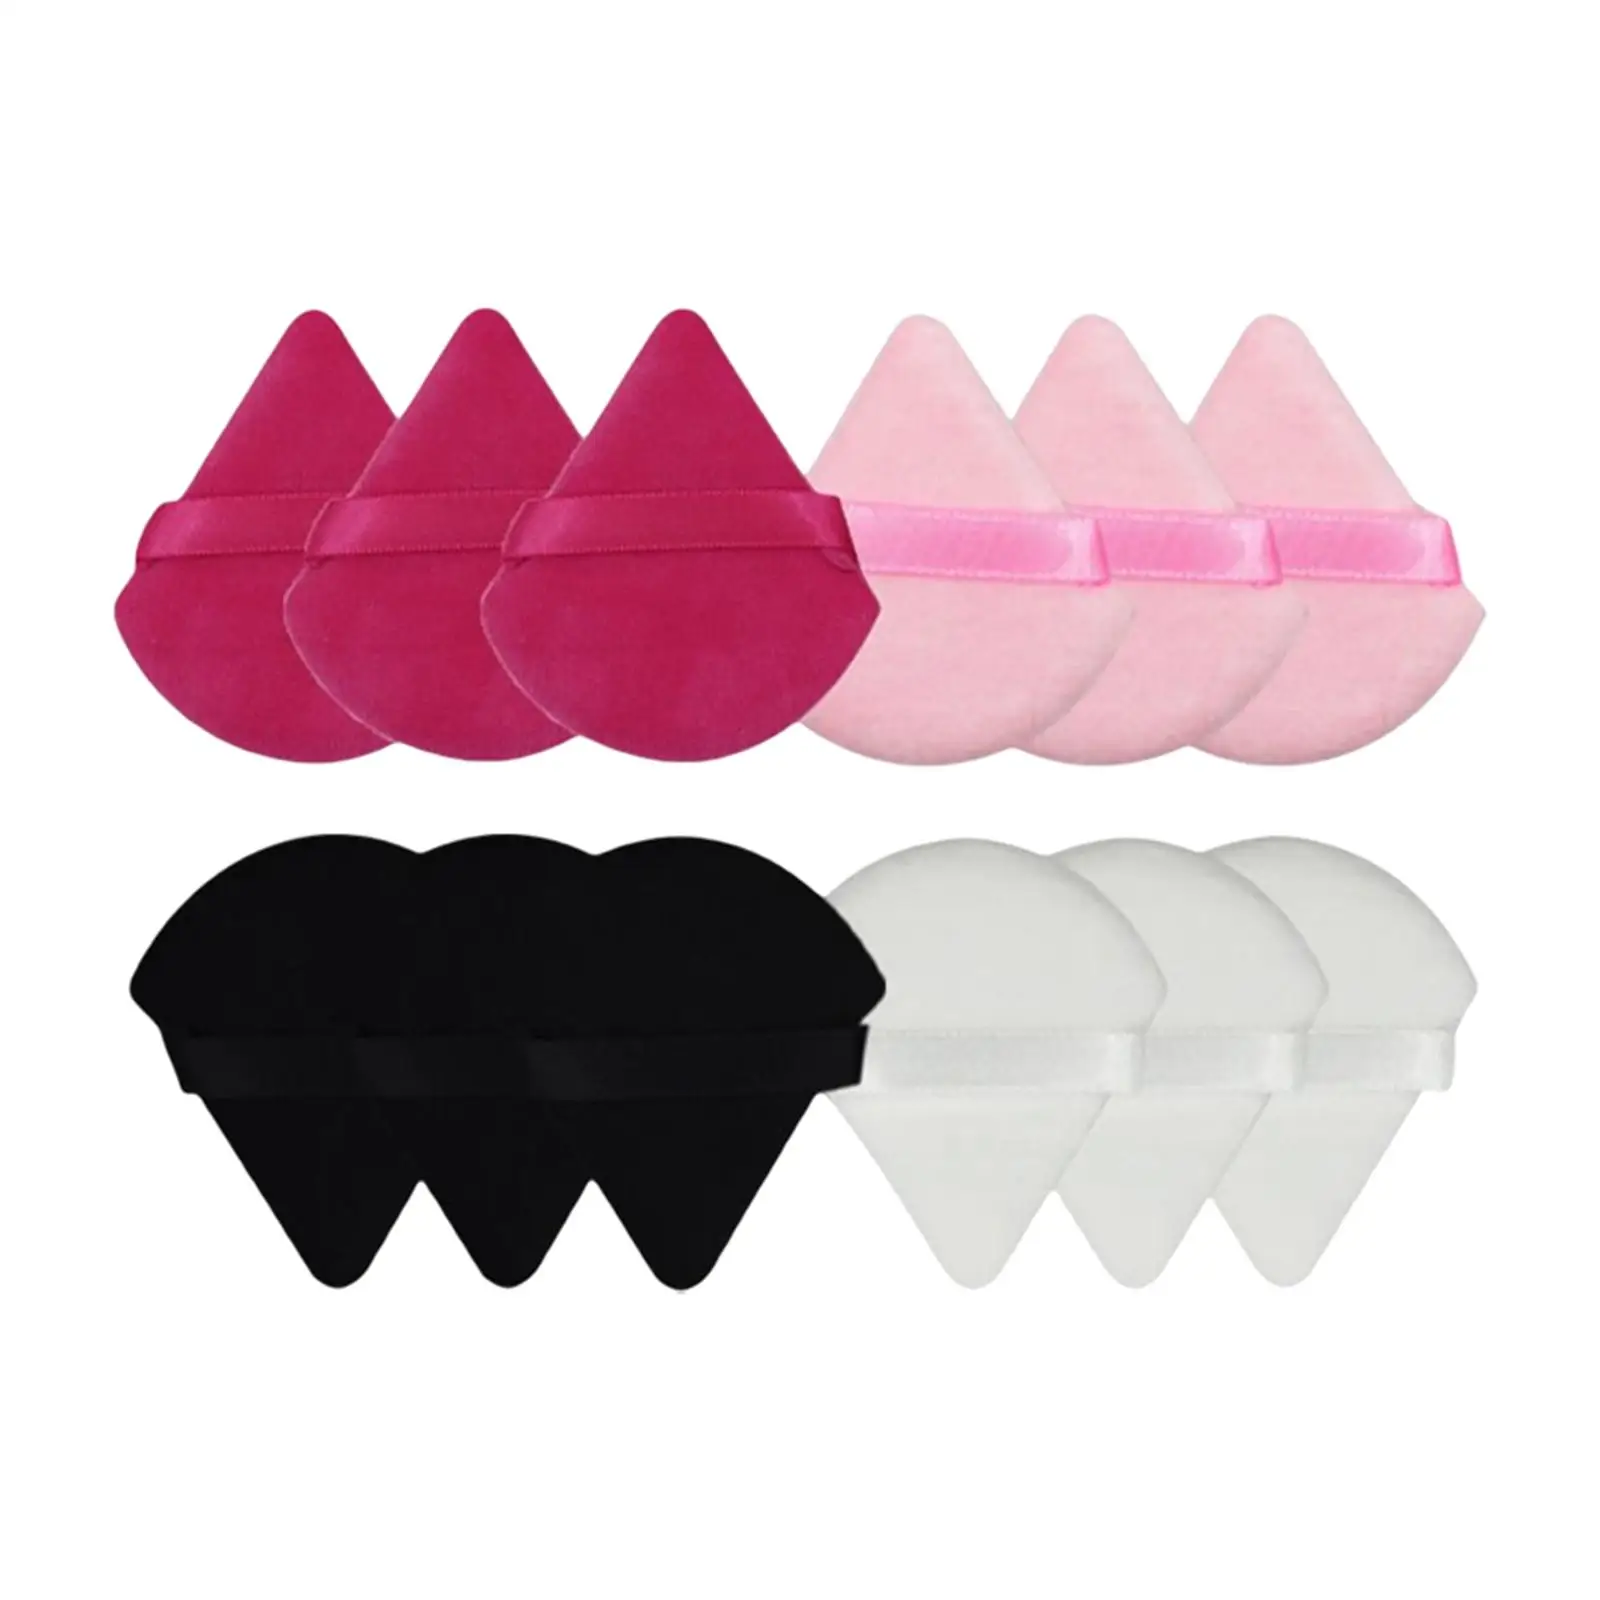 12Pieces Triangle Powder Beauty Makeup Tool Washable Wedge Shape Wet Dry Dual Use Makeup Puff for Loose Powder Foundation